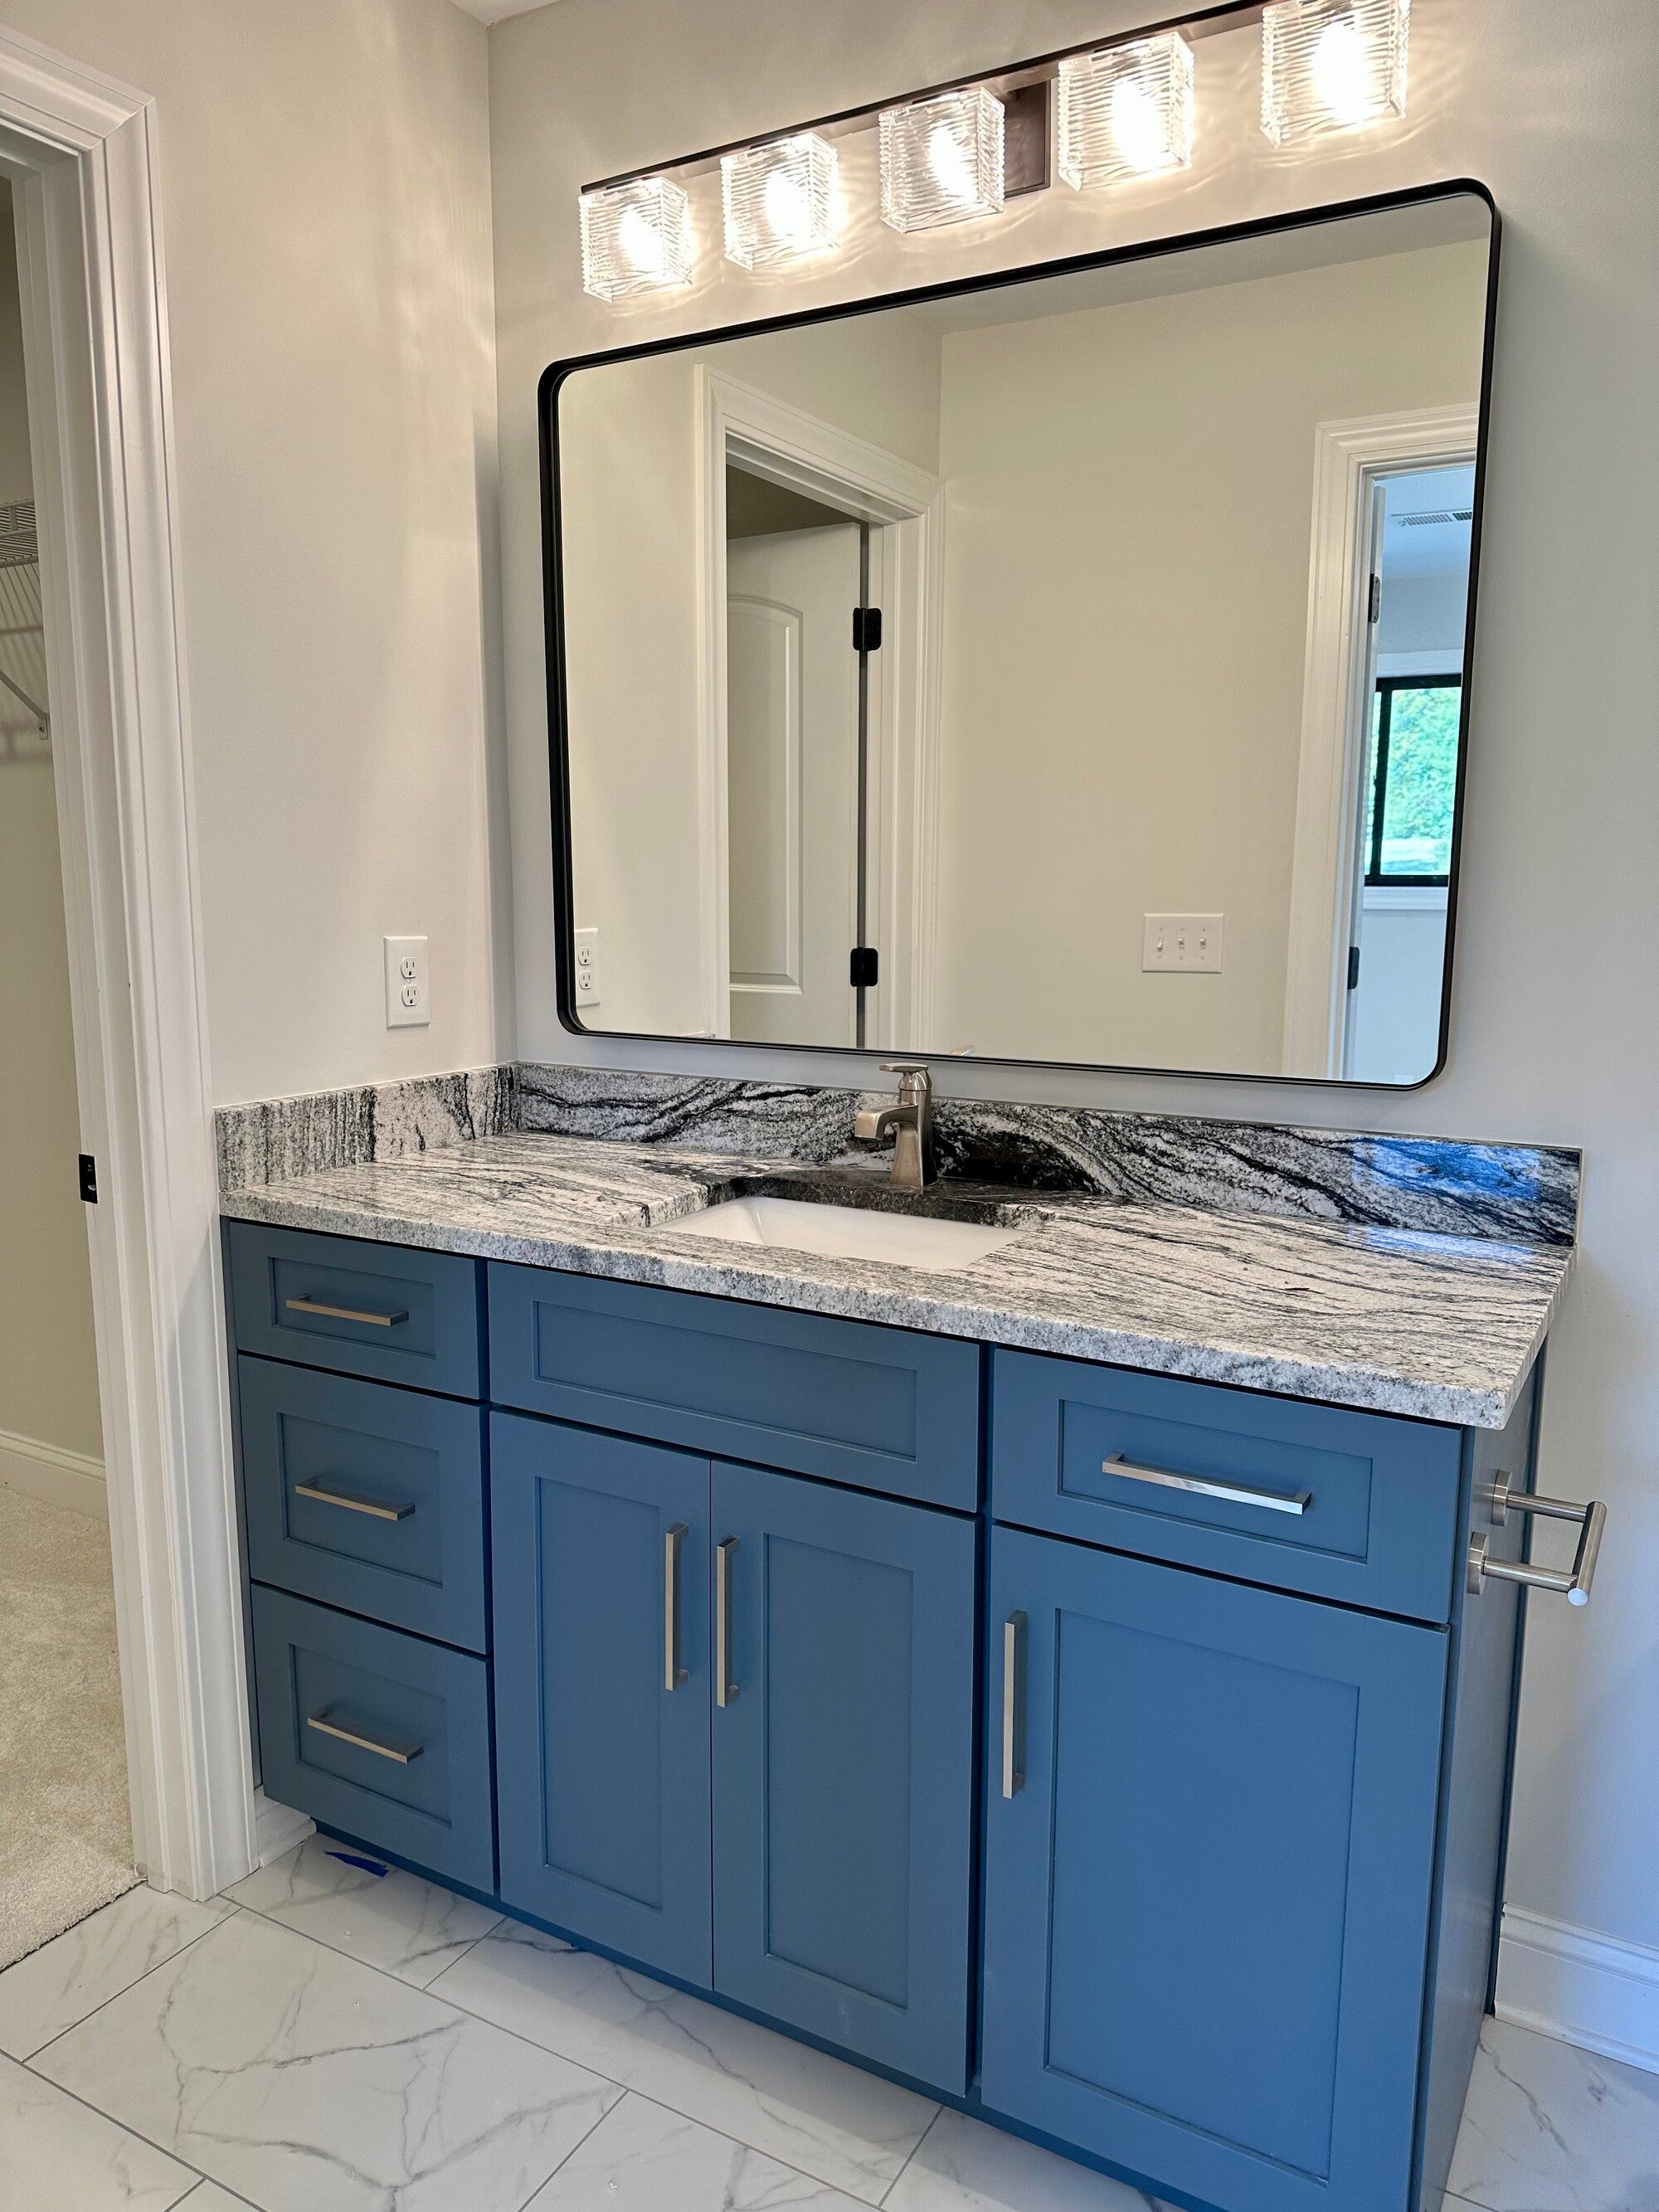 Bathroom with a large black-framed mirror, four modern lights, blue vanity with marbled countertop, silver handles, and white tile floor with gray veining